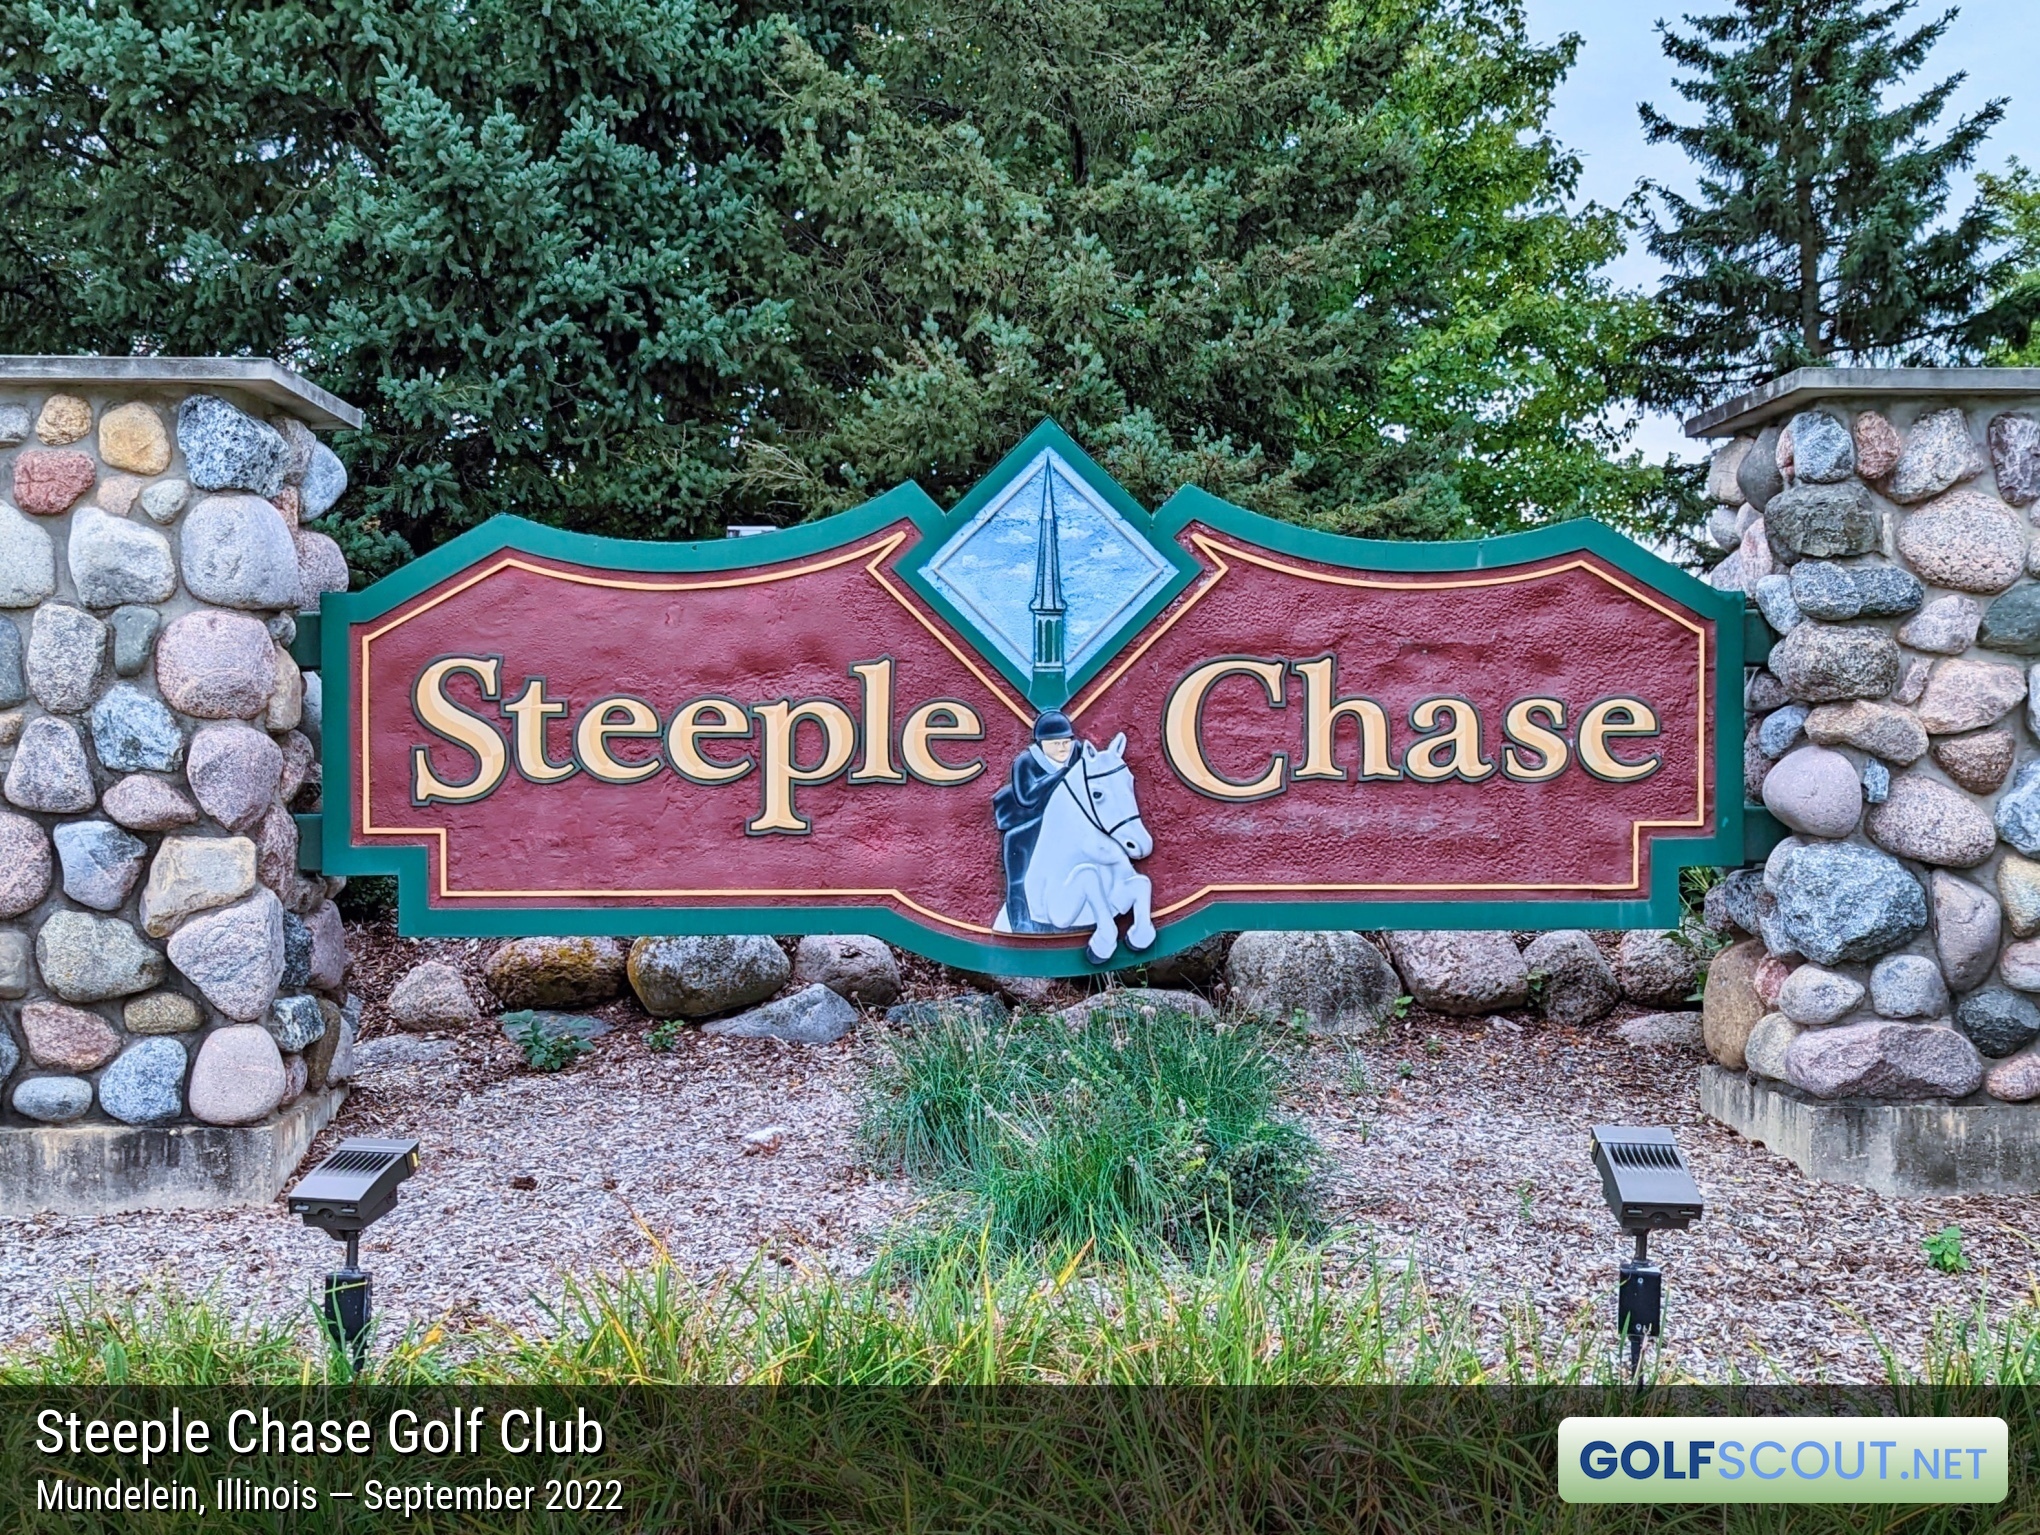 Sign at the entrance to Steeple Chase Golf Club